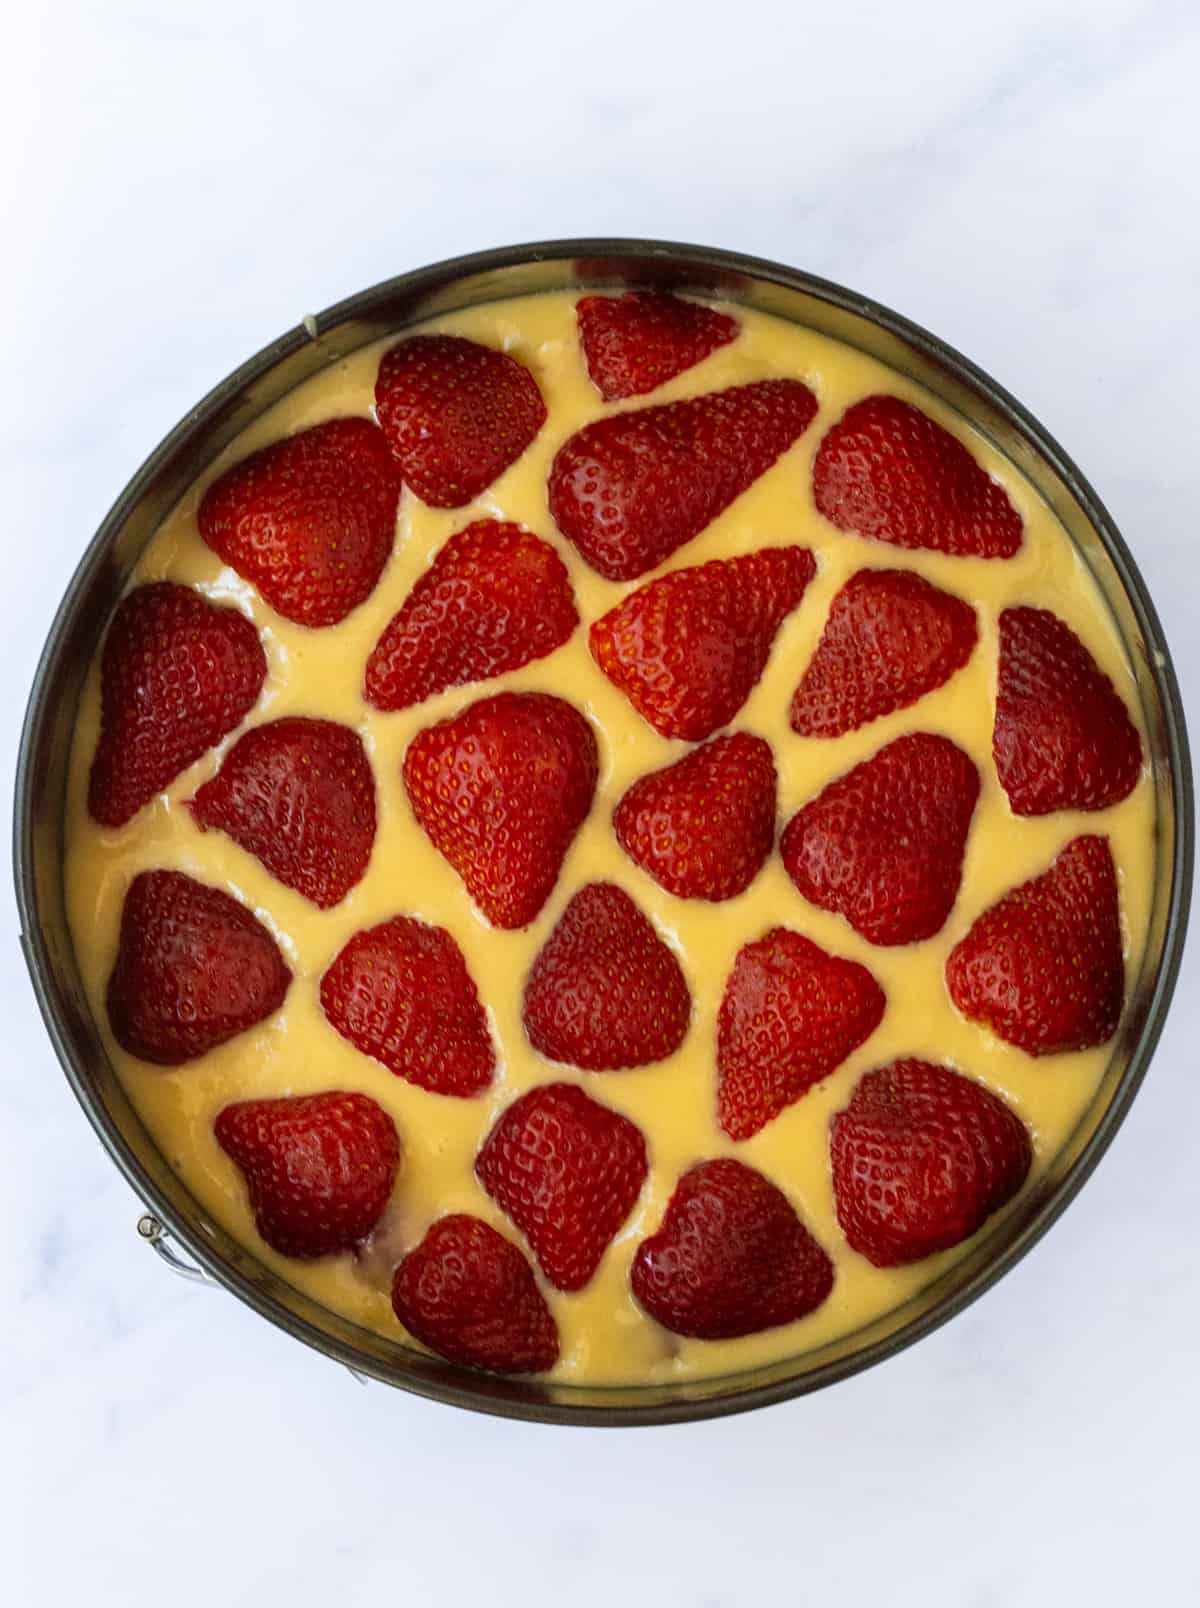 Vanilla cake batter topped with strawberry halves in a springform pan.